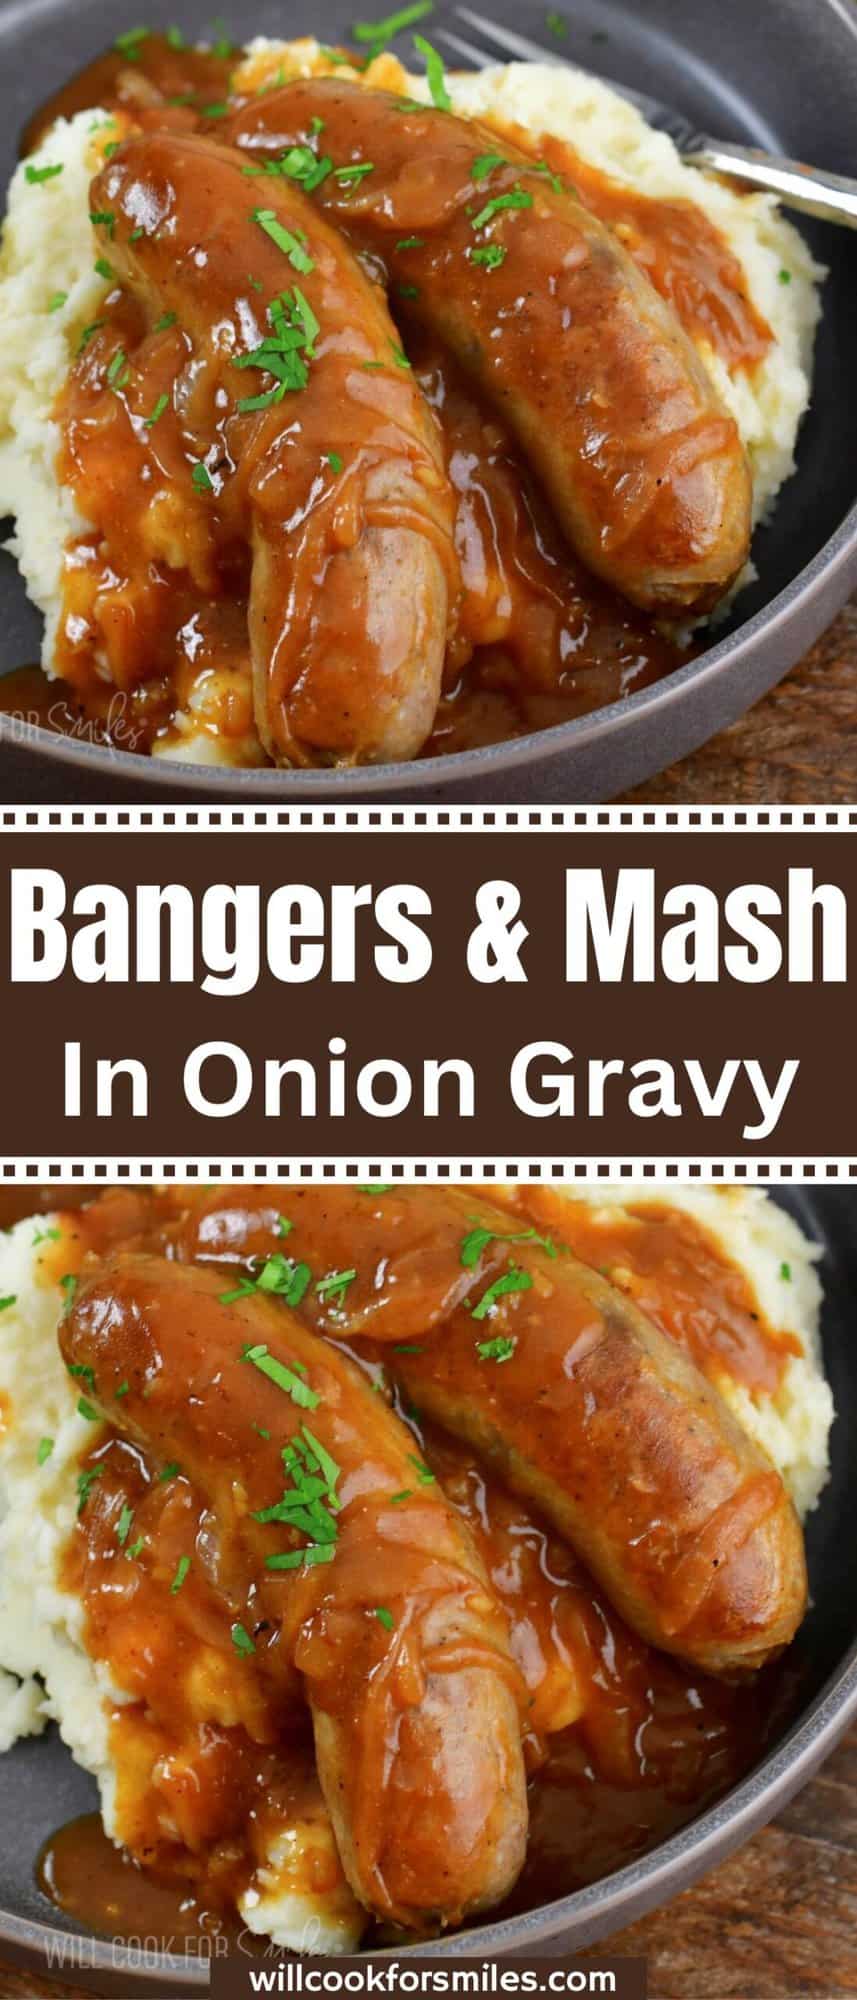 collage of two images of bangers and mash with title.